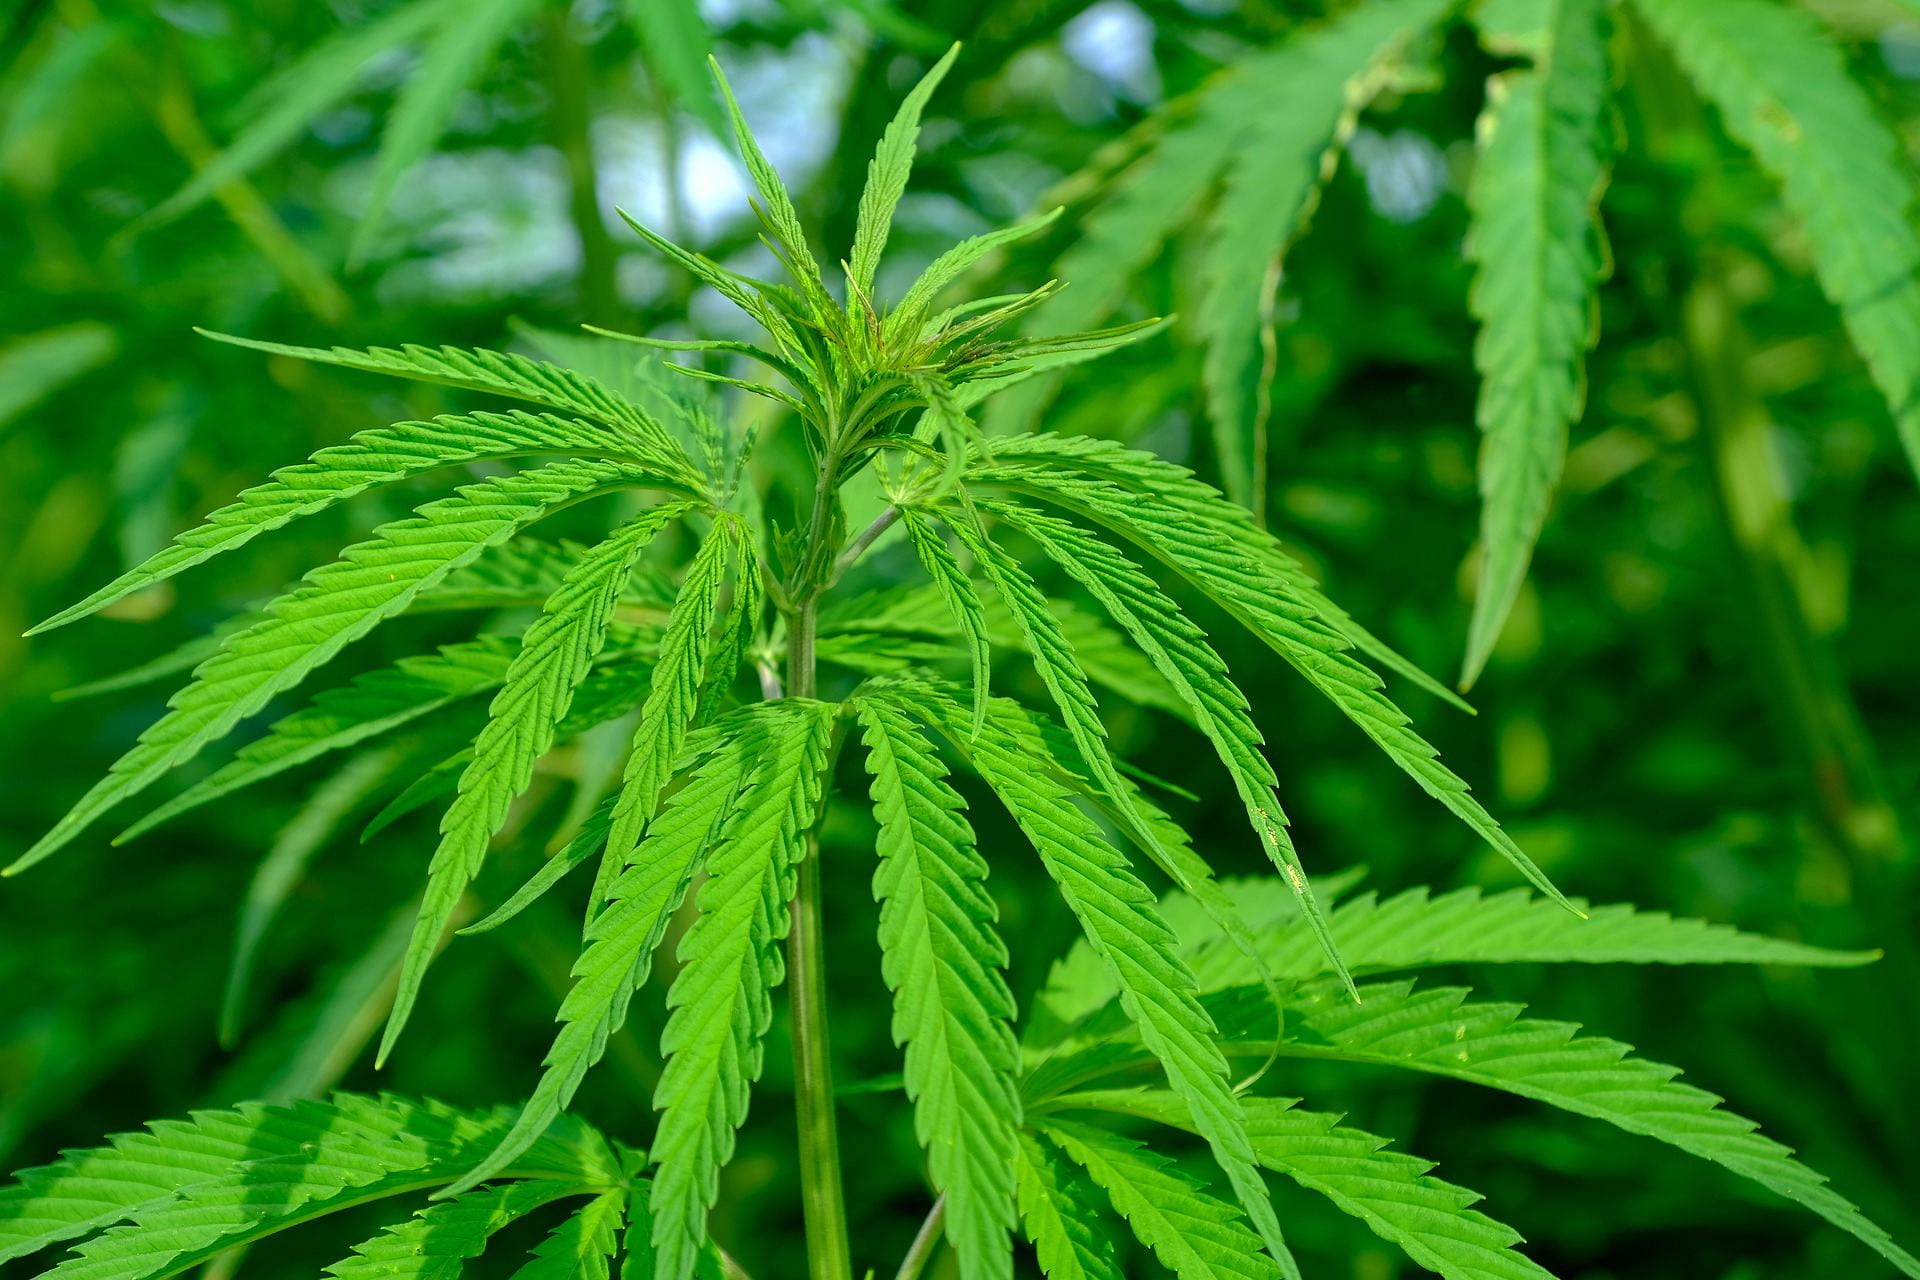 The image shows Cannabis sativa plant.